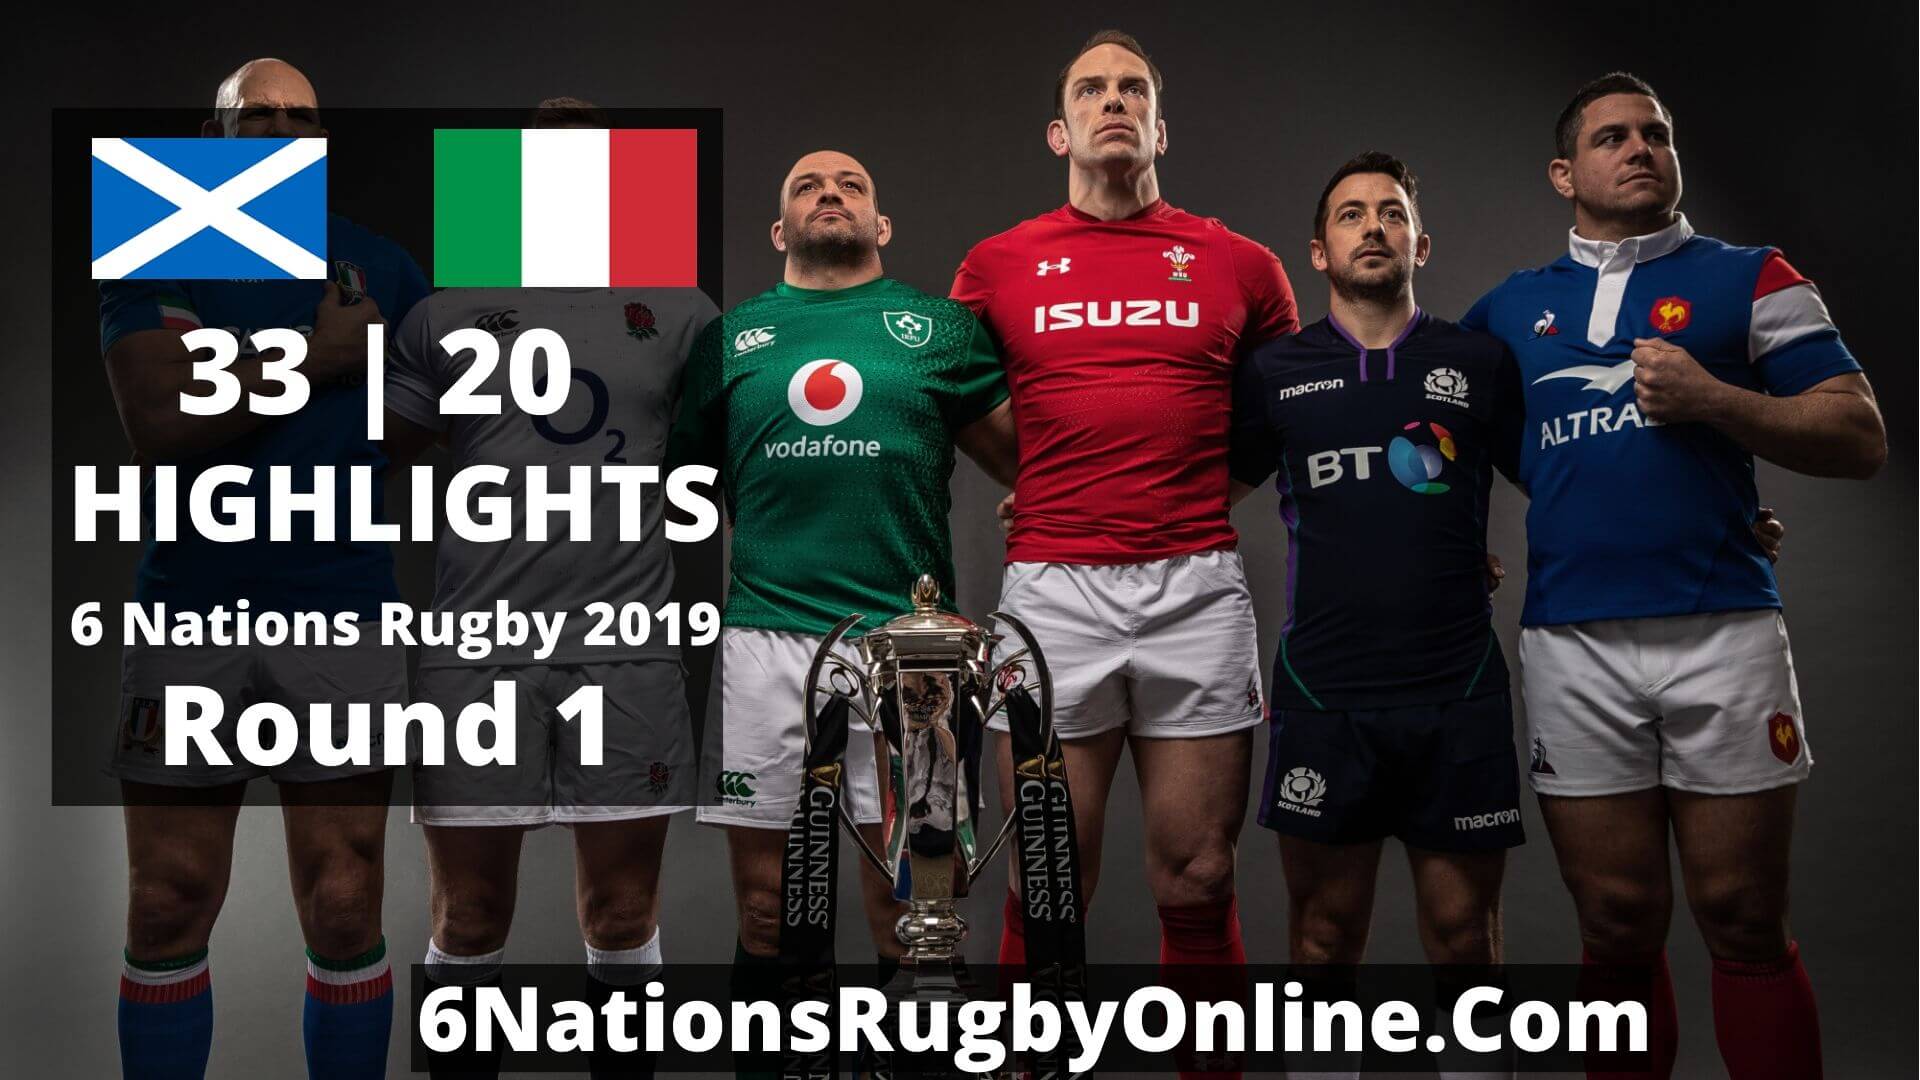 Scotland Vs Italy Highlights 2019 Six Nations Rugby Round 1